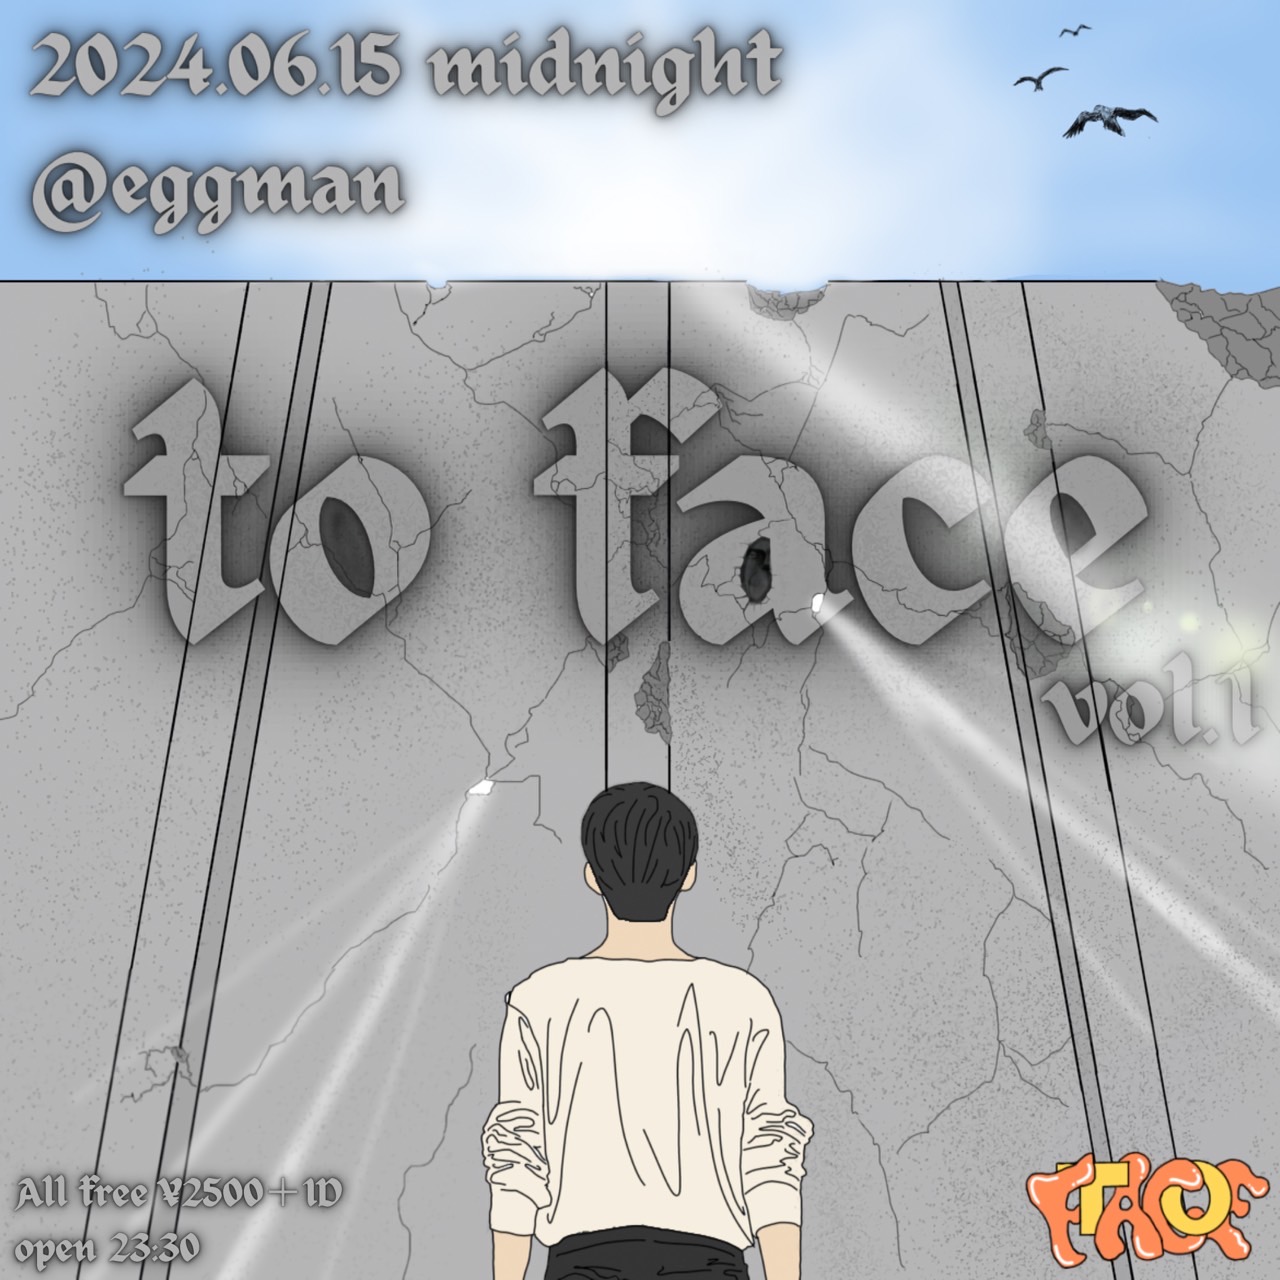 to face vol.1